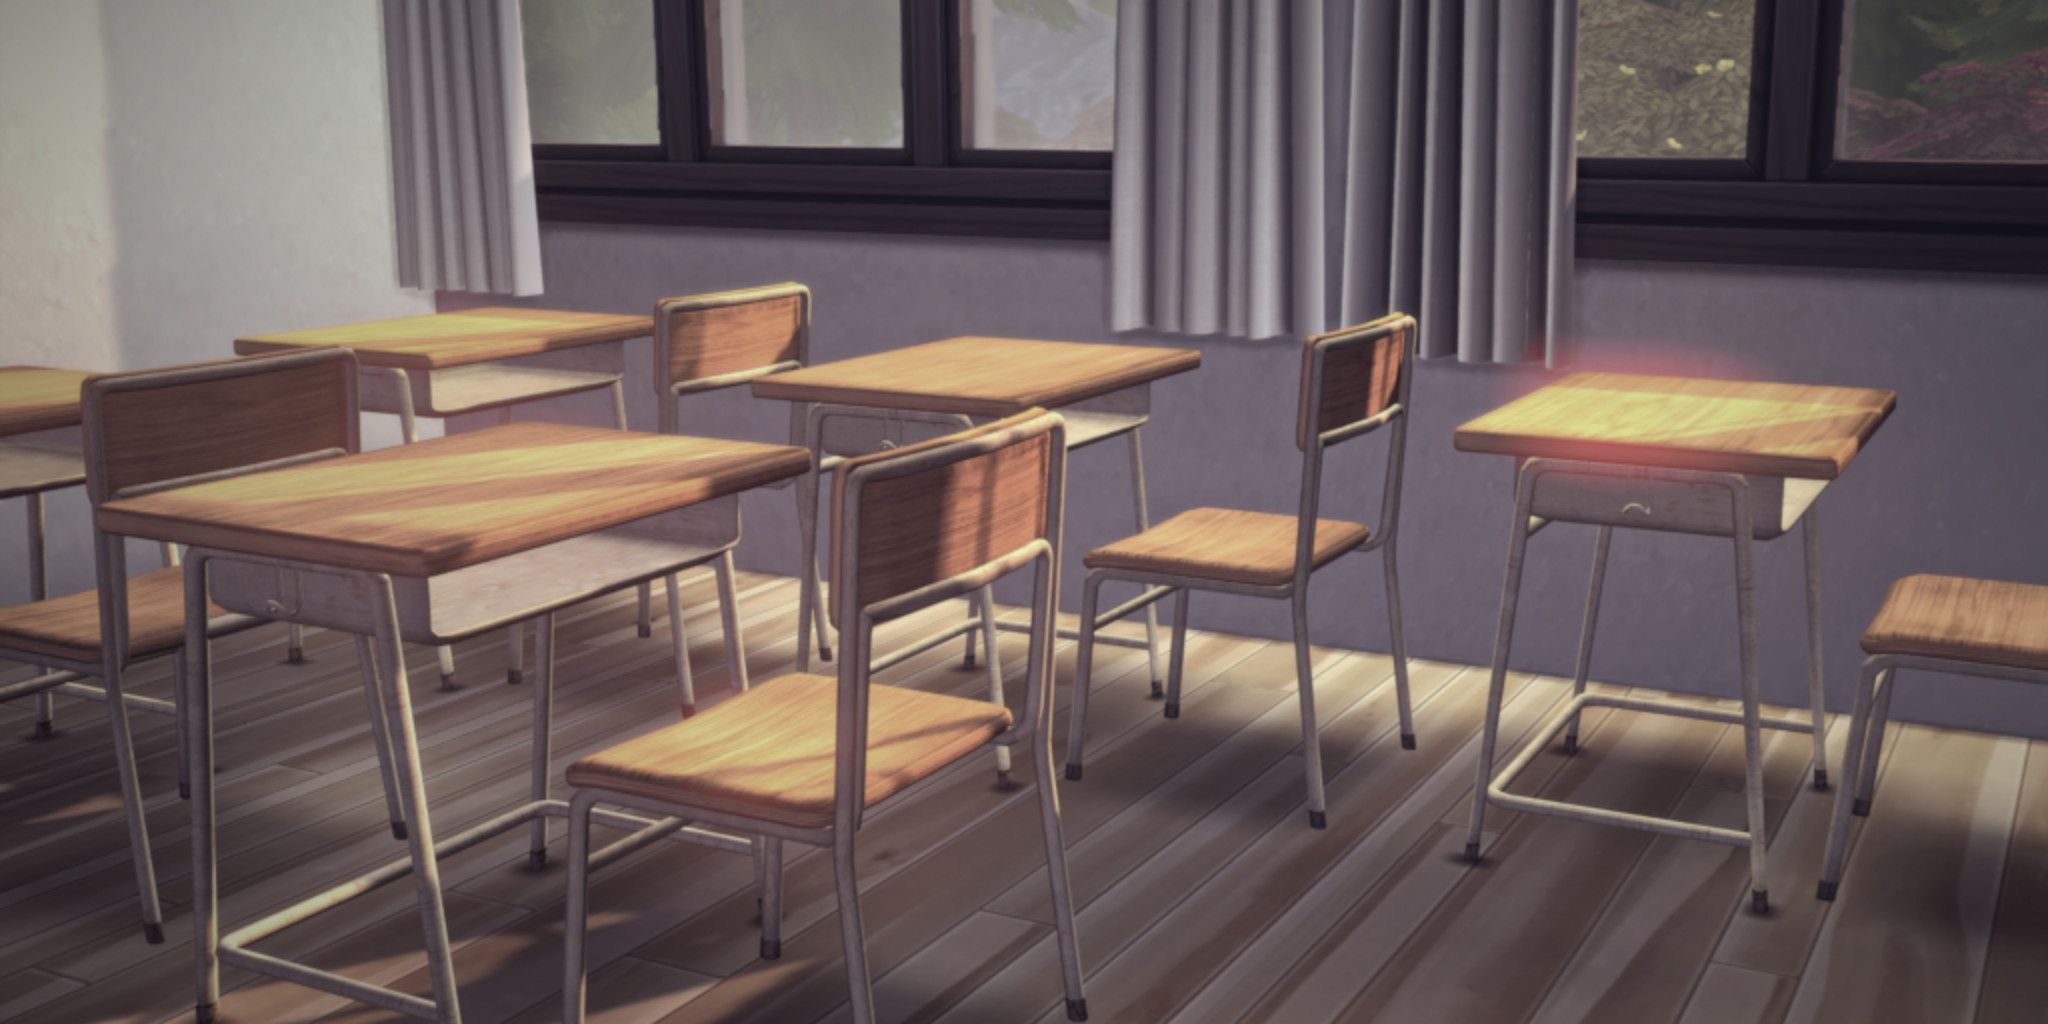 sims 4 cc set with Japanese style school desks and chairs